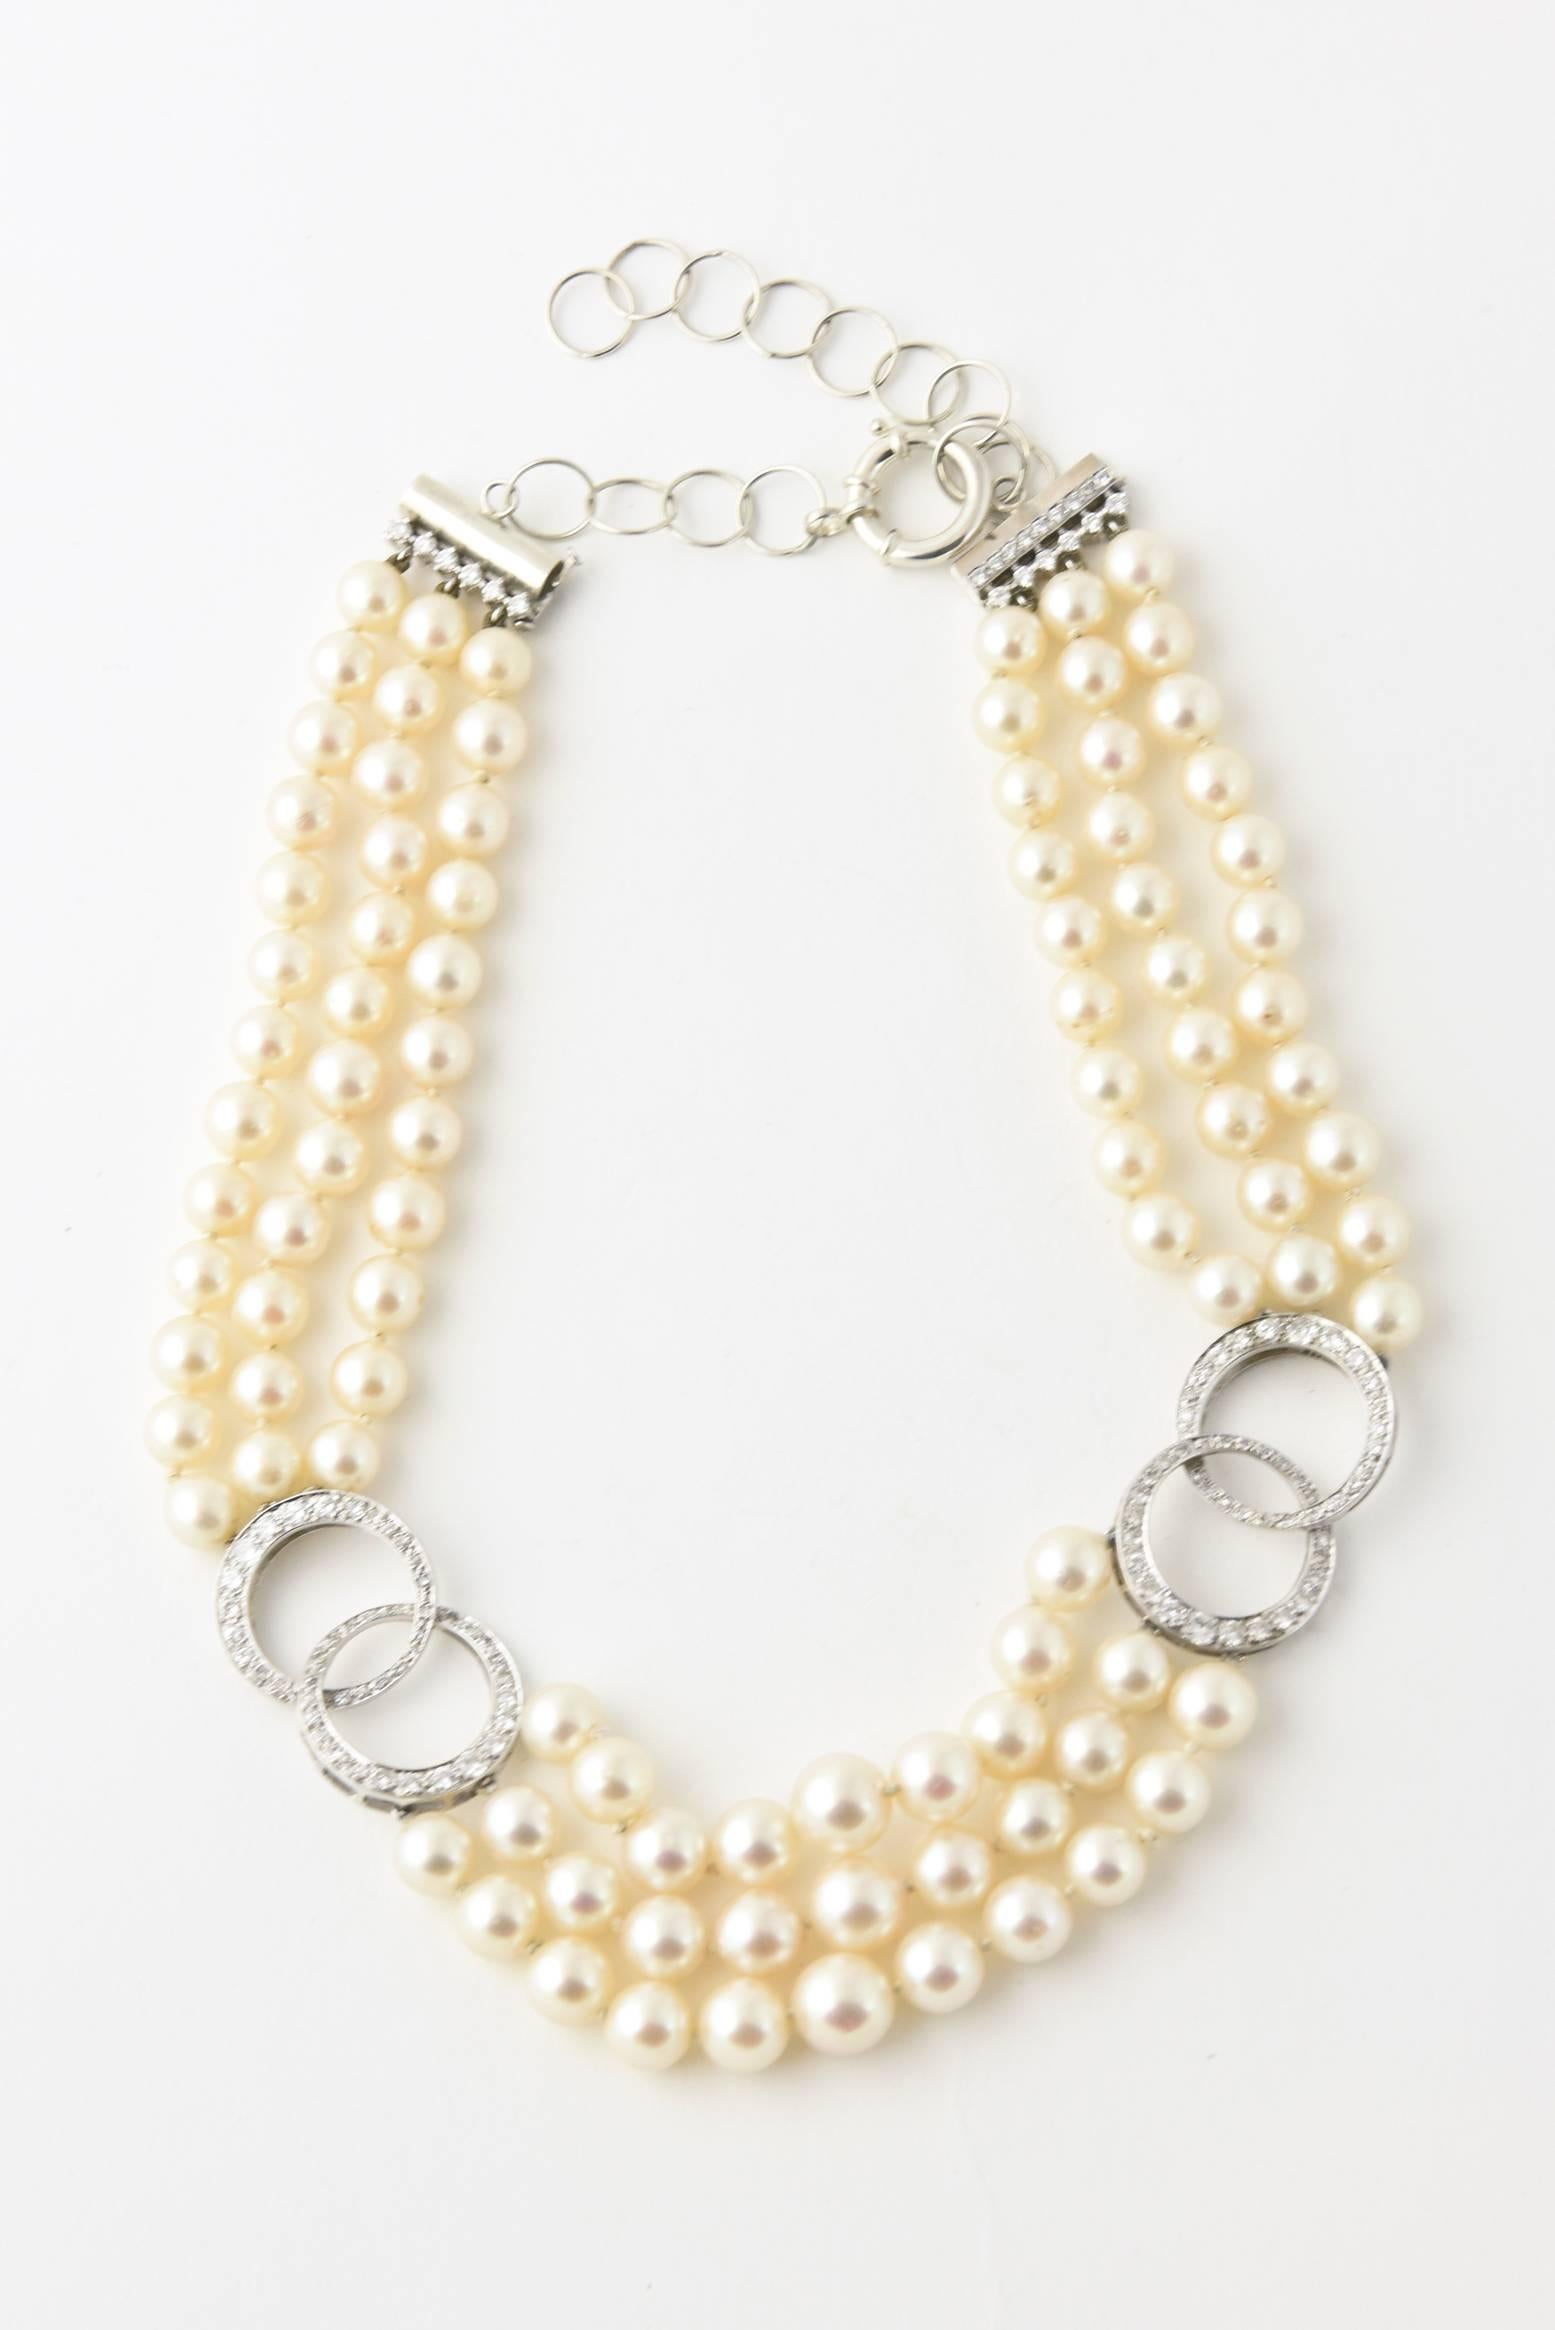 graduated 8 - 10mm Cultured pearls with layered diamond circle accents. 3 carats of diamonds.  The necklace is 14k white gold.  The client added a sterling extender to make it longer.  We can have it professionally returned to original form if the